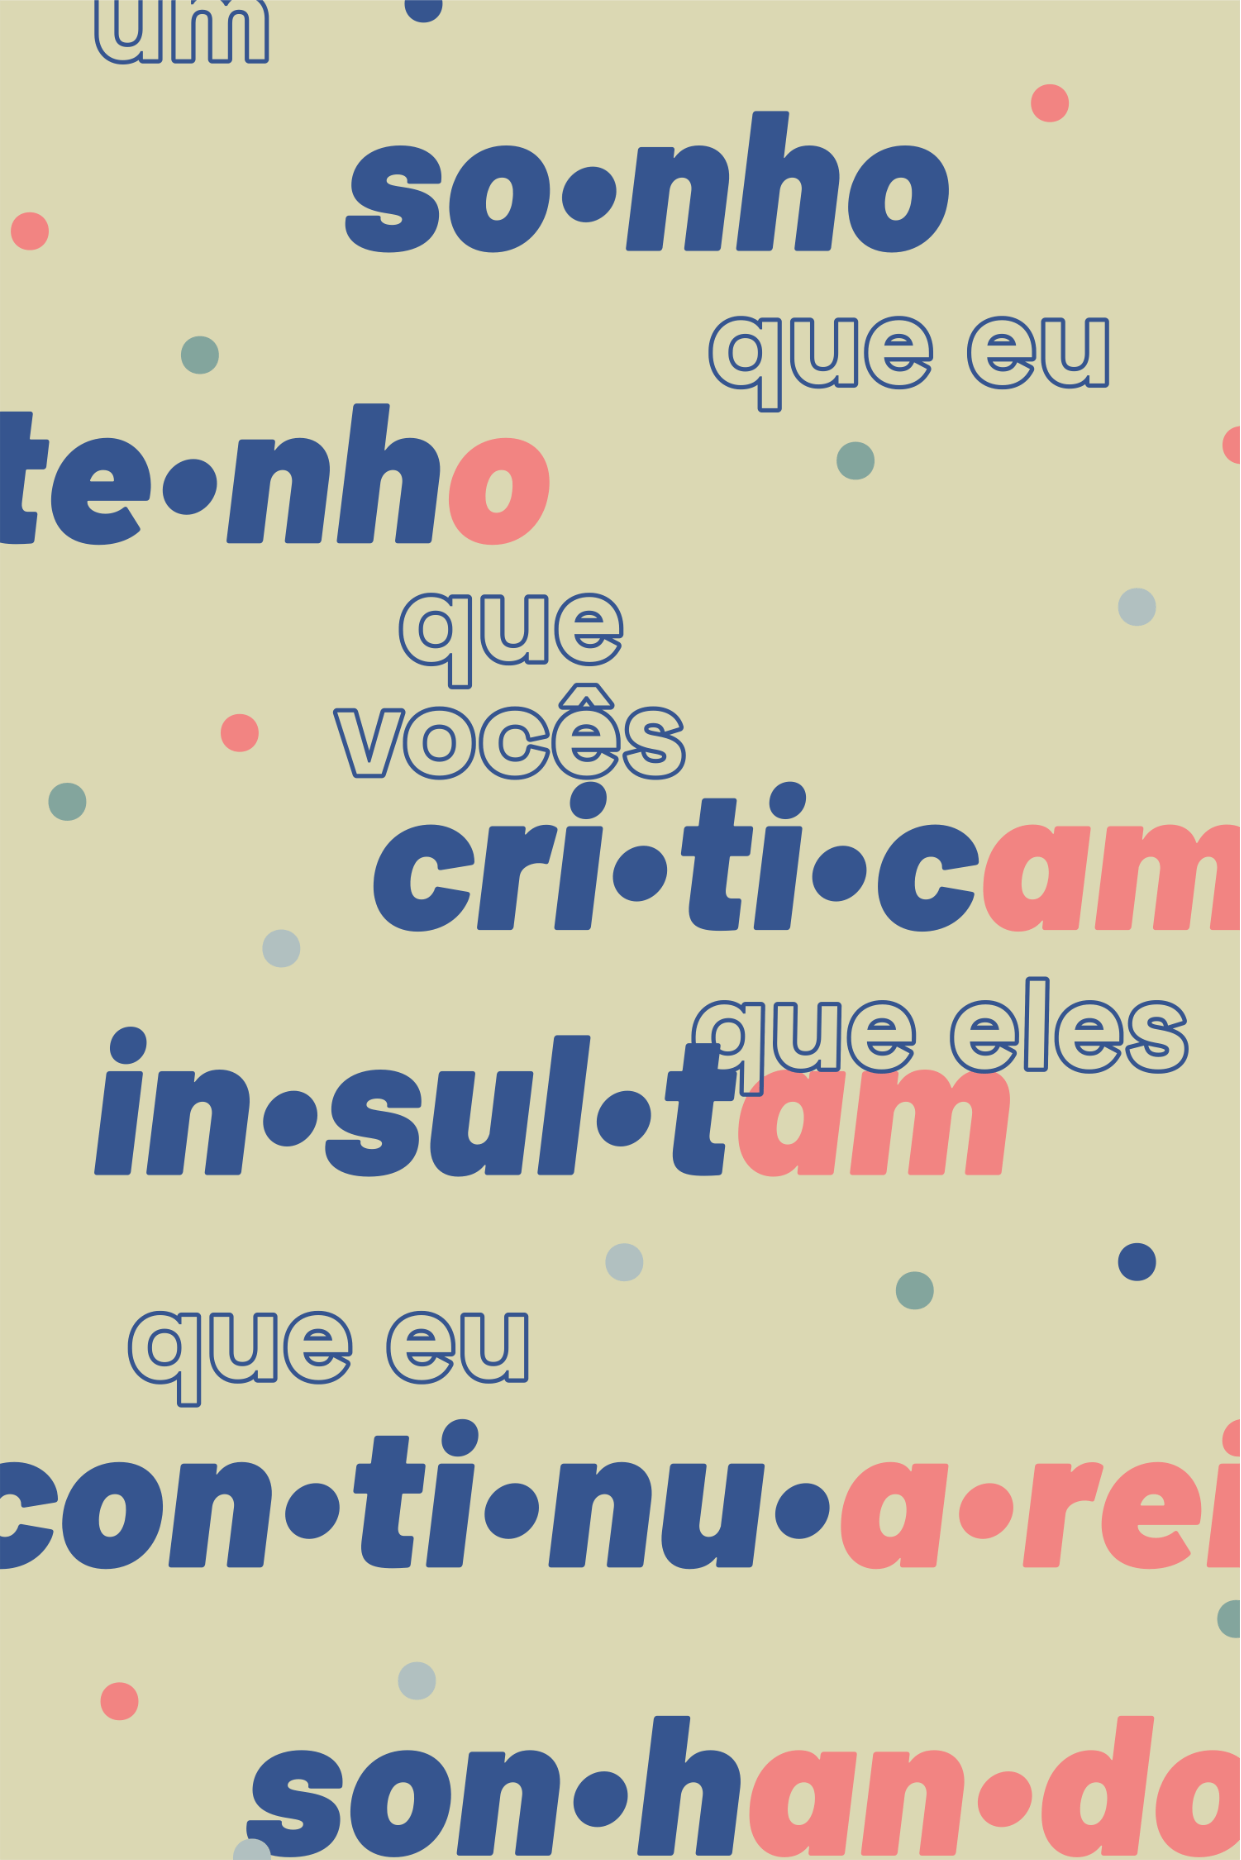 A poster containing Portuguese words scattered about, with bullet points to separate the syllables of the verbs. The words, when read from top to bottom and translated, read, "a dream I have, that you criticize, that they insult, that I'll continue dreaming".